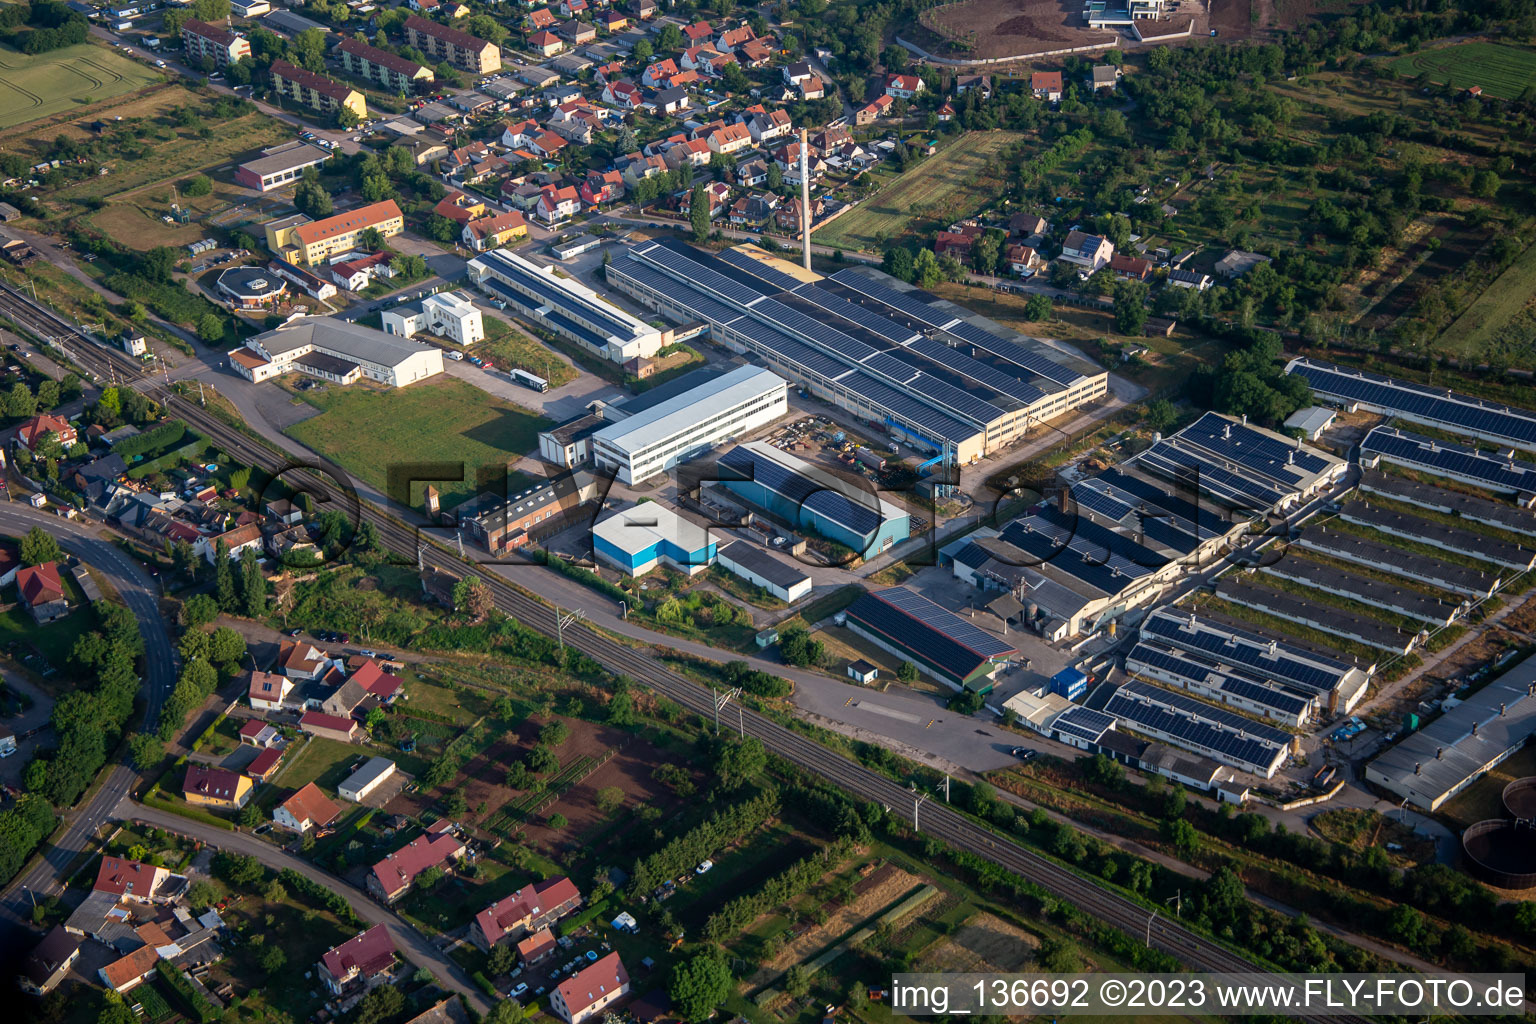 Aerial view of WM Agrar - Agriculture Wallhausen GmbH & Co.KG in Wallhausen in the state Saxony-Anhalt, Germany